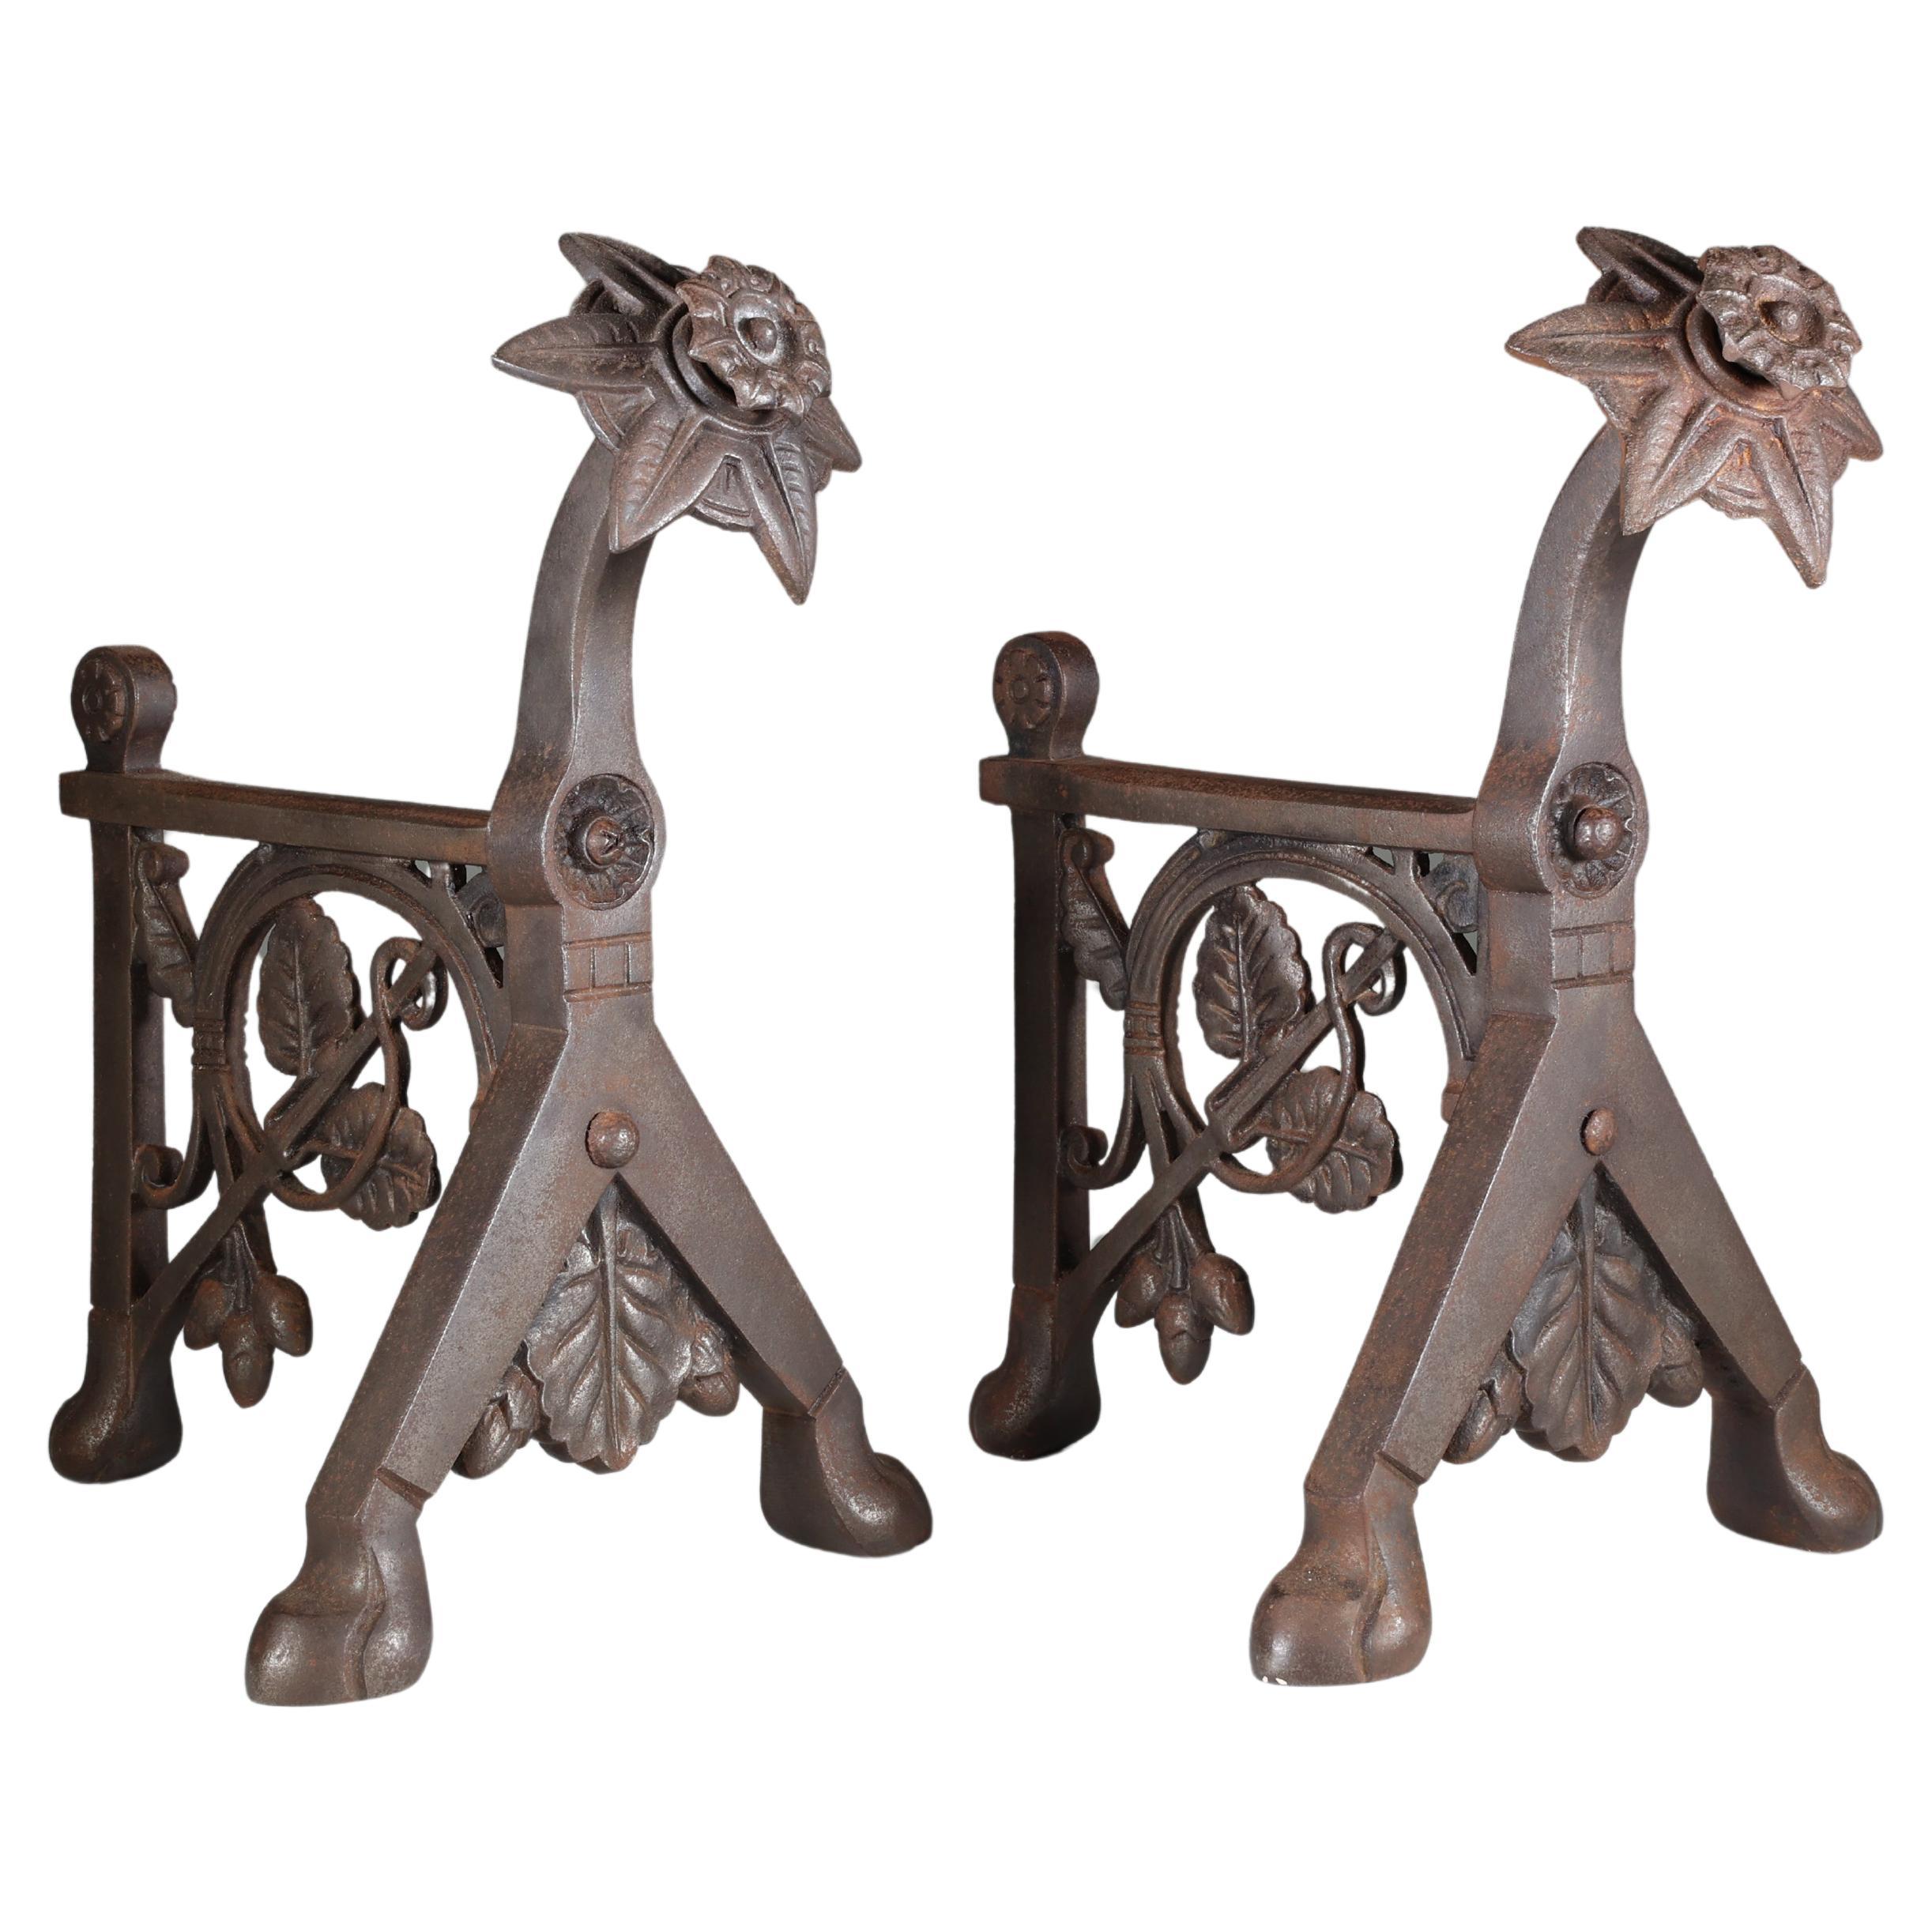 Dr C Dresser (style of). A pair of Arts and Crafts Cast Iron Fire Dogs For Sale